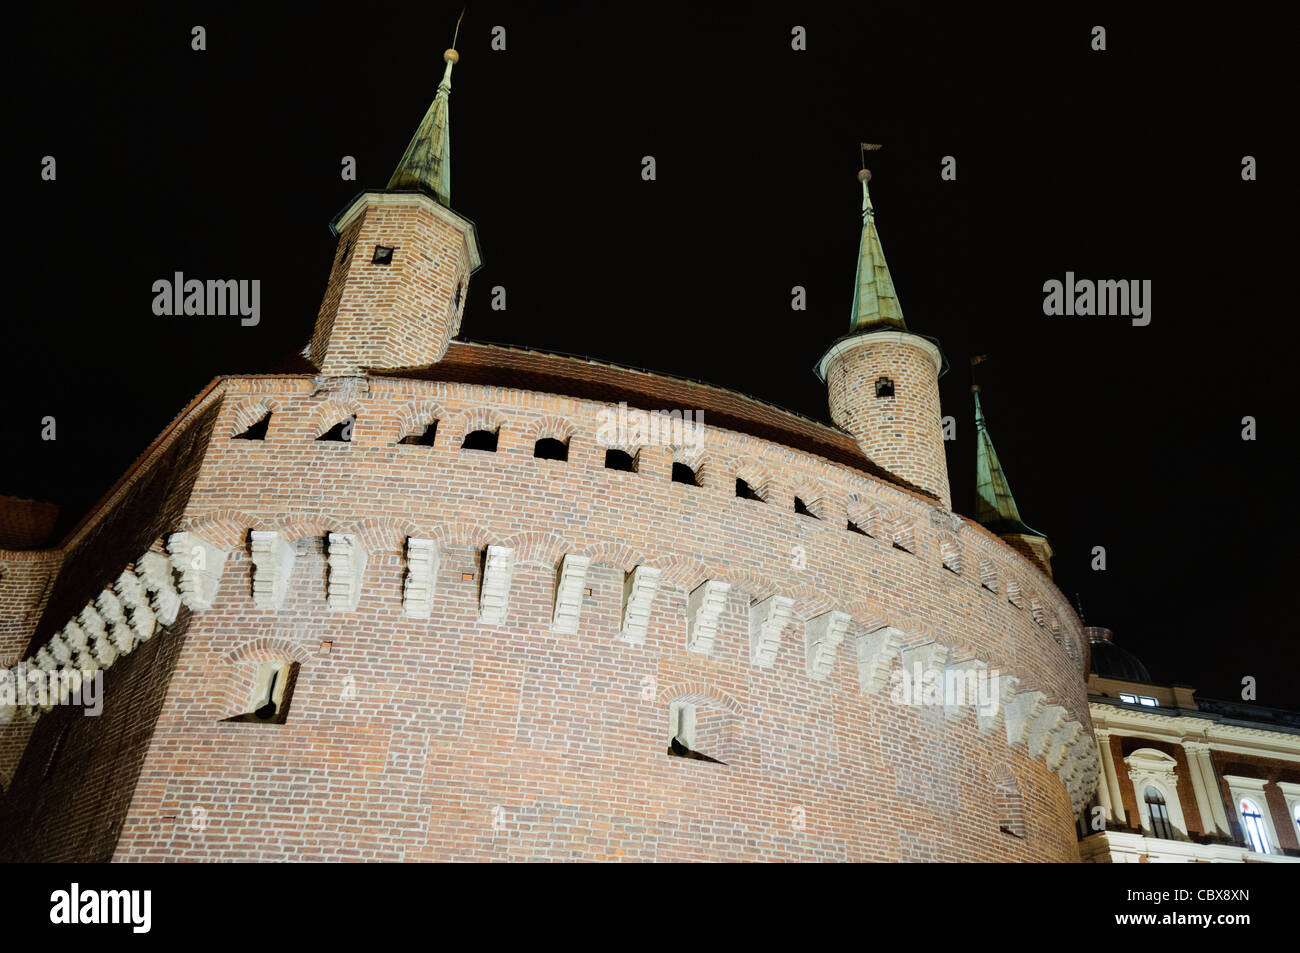 Krakow Barbican roof at night Stock Photo